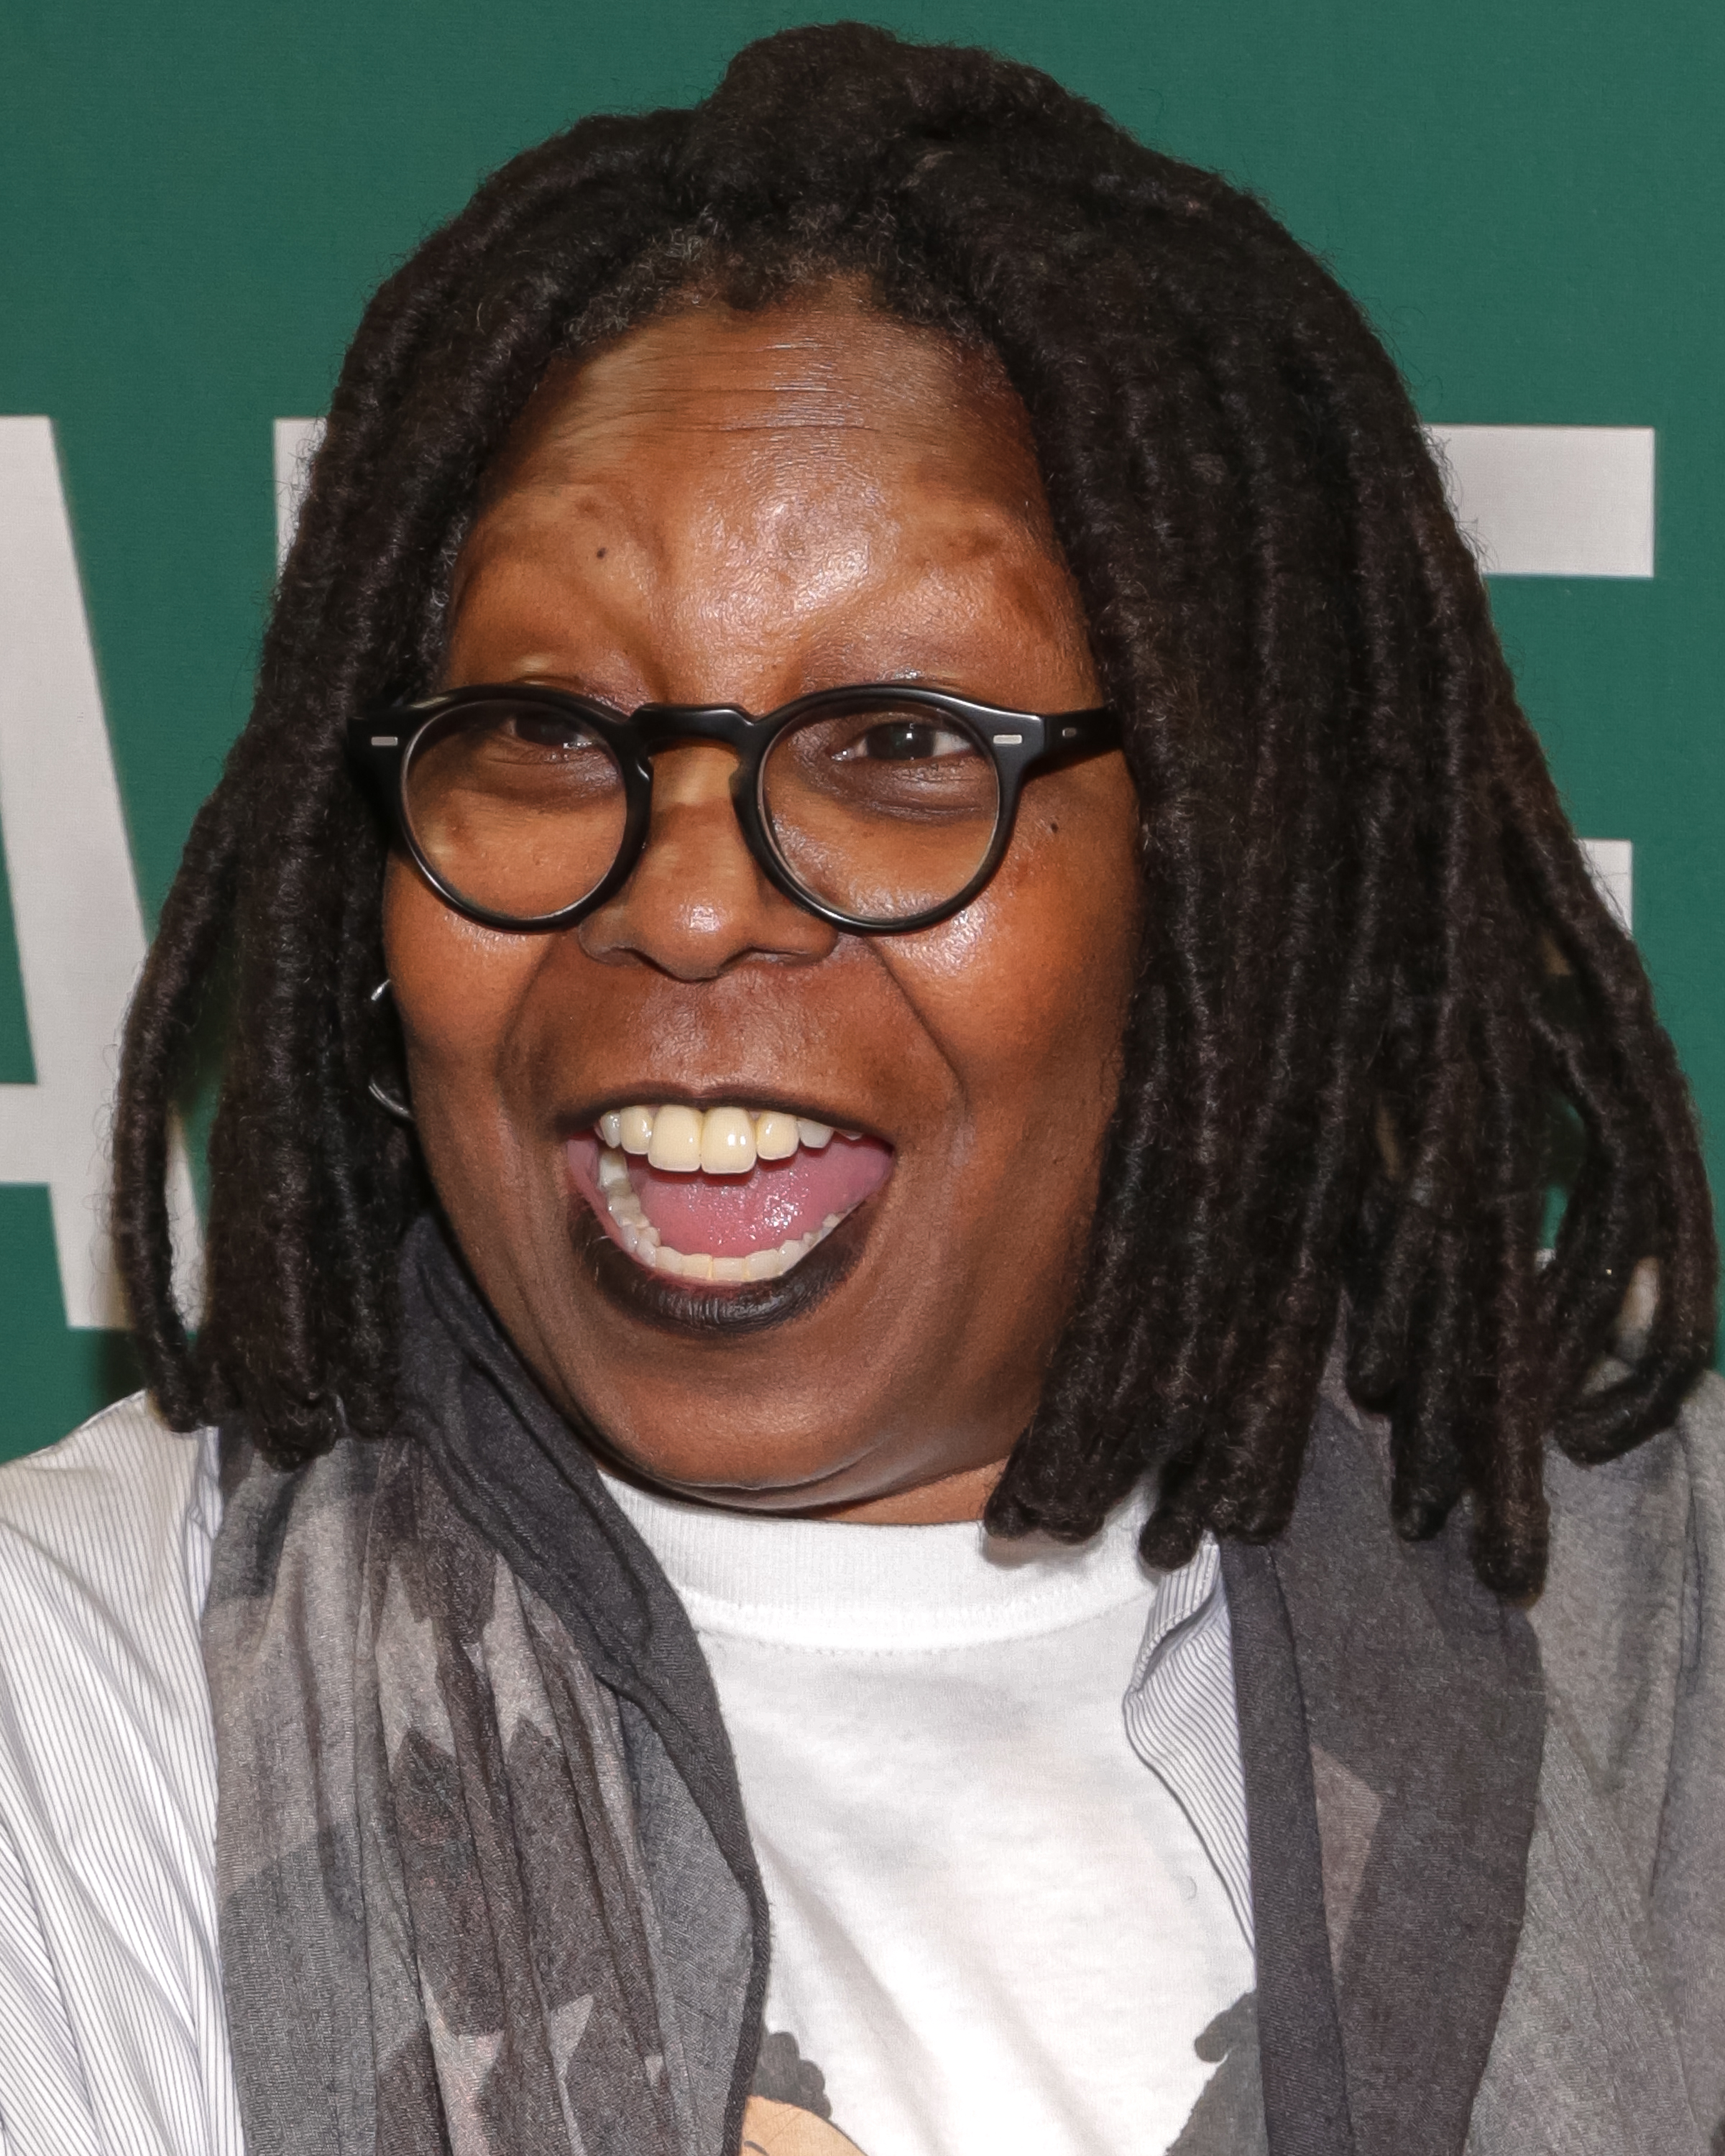 Whoopi Goldberg at her book signing event in New York City, 2015 | Source: Getty Images